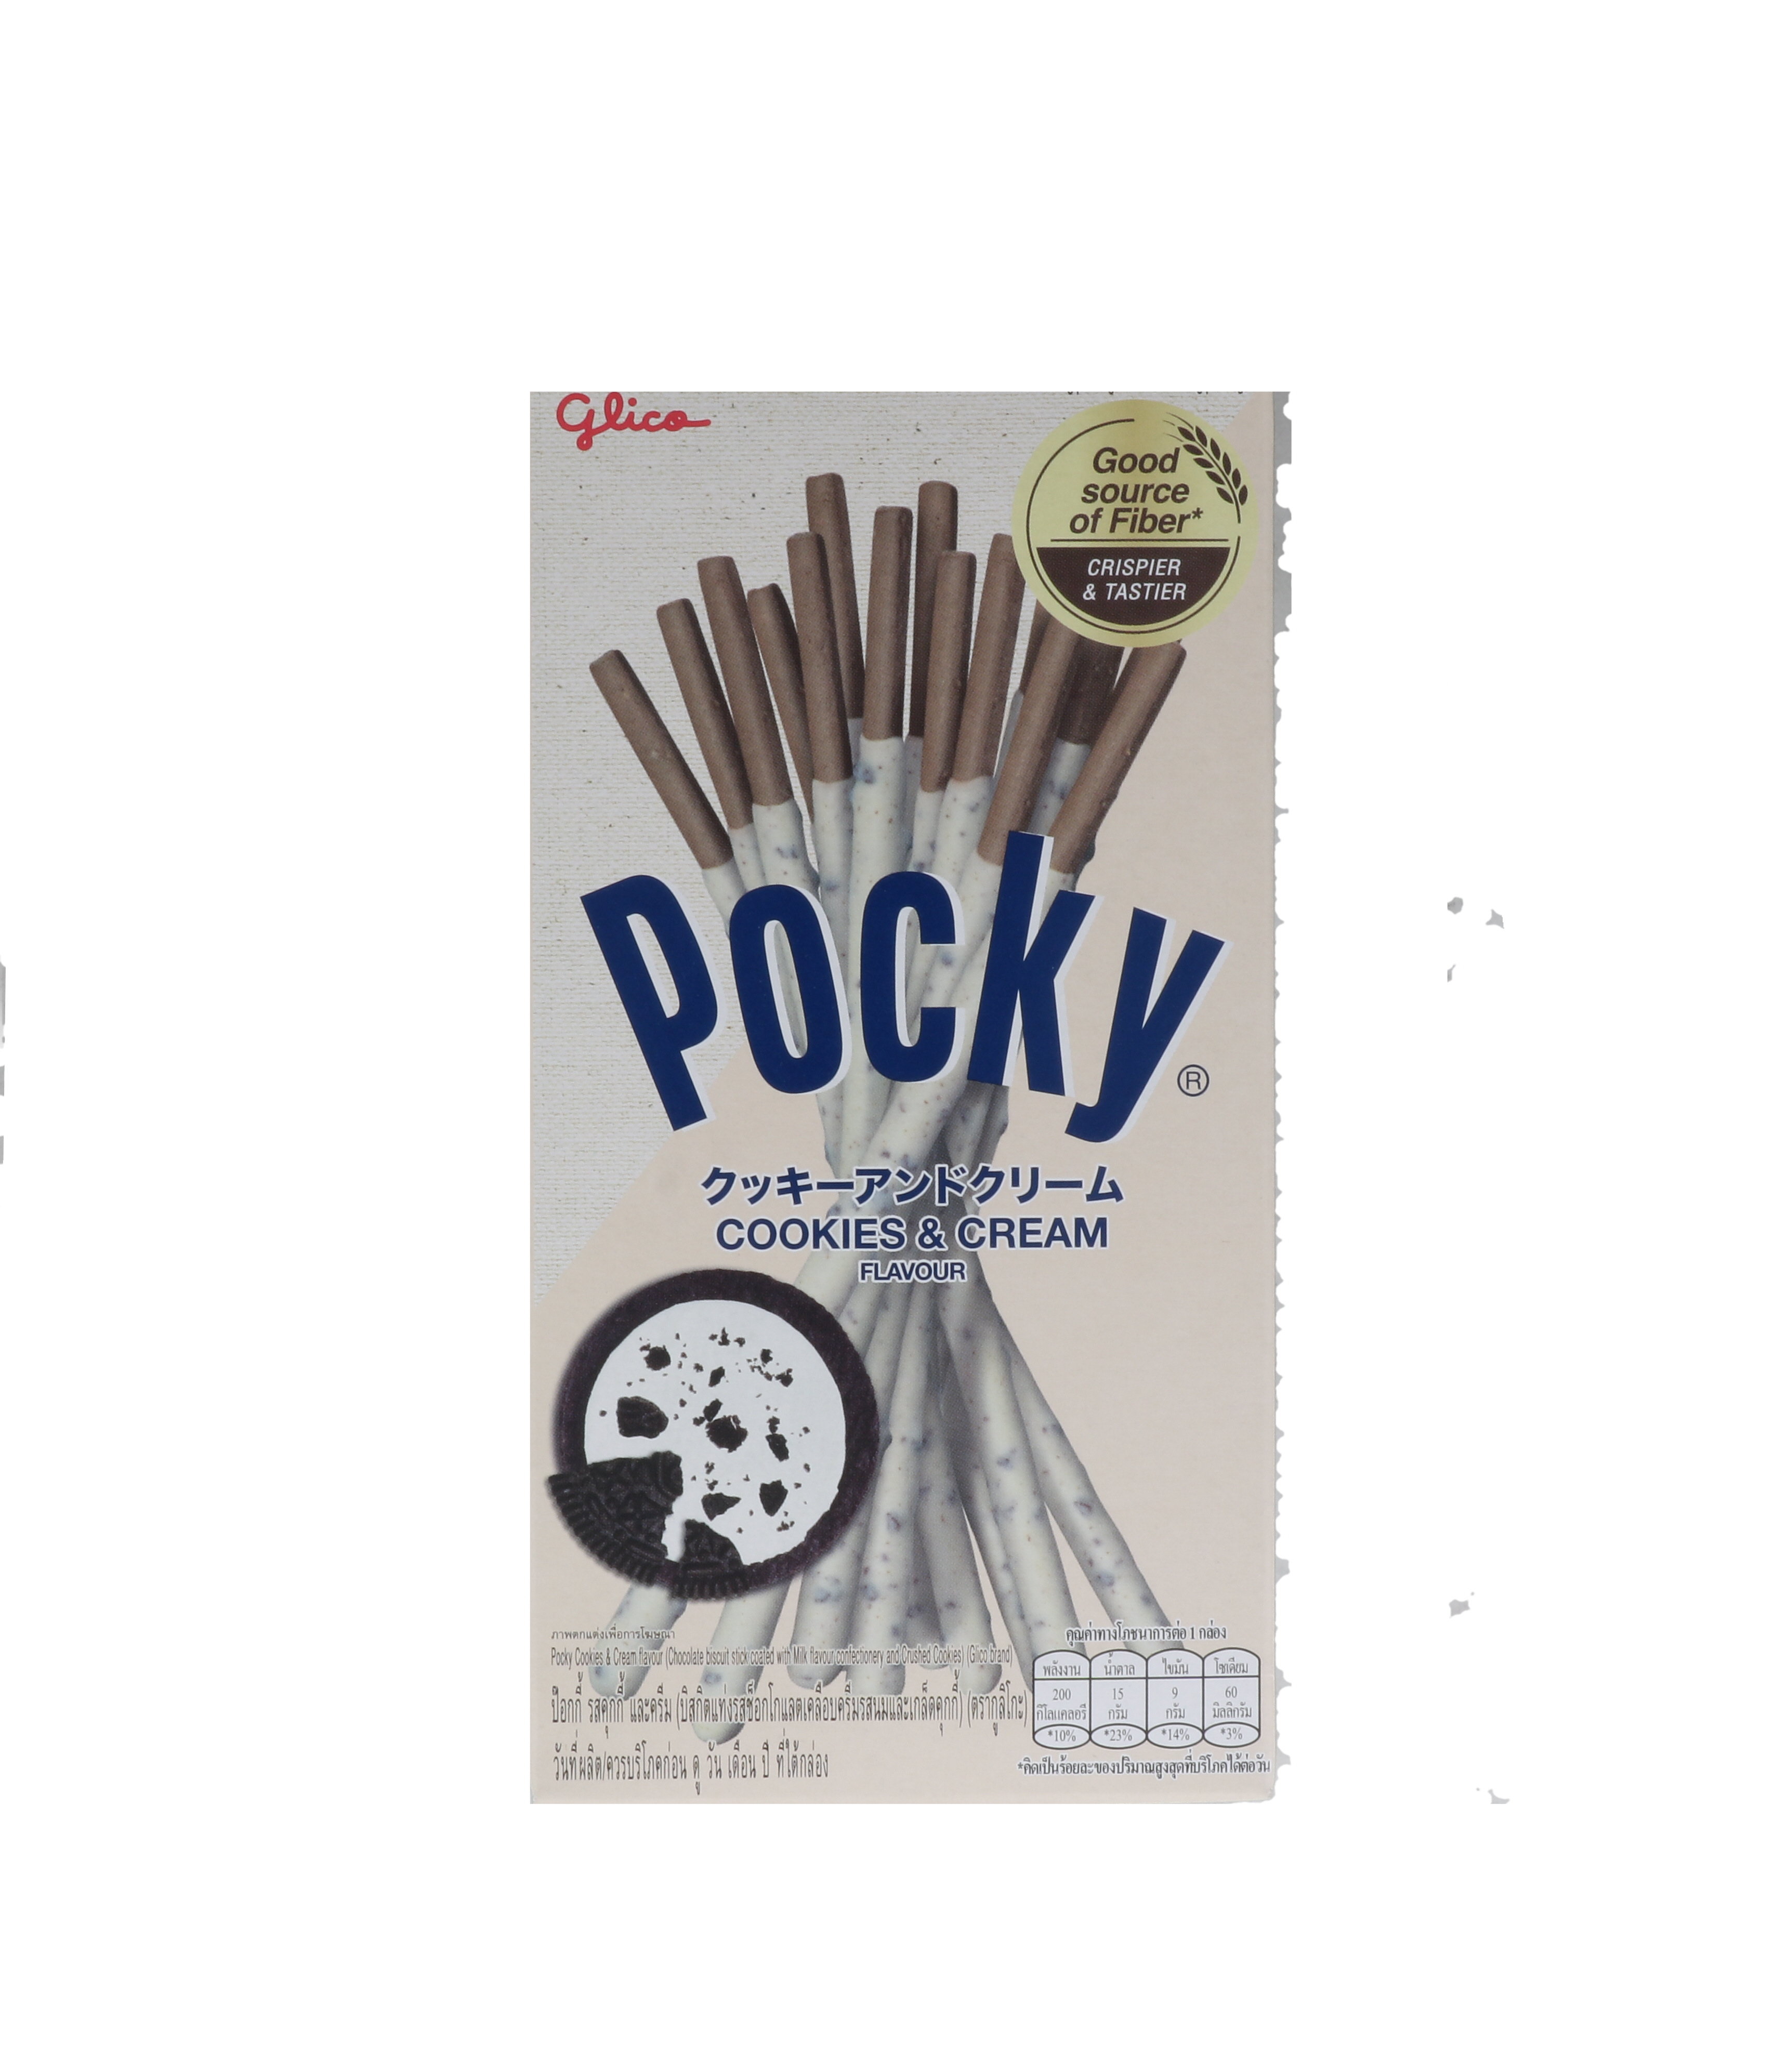 POCKY COOKIES AND CREAM